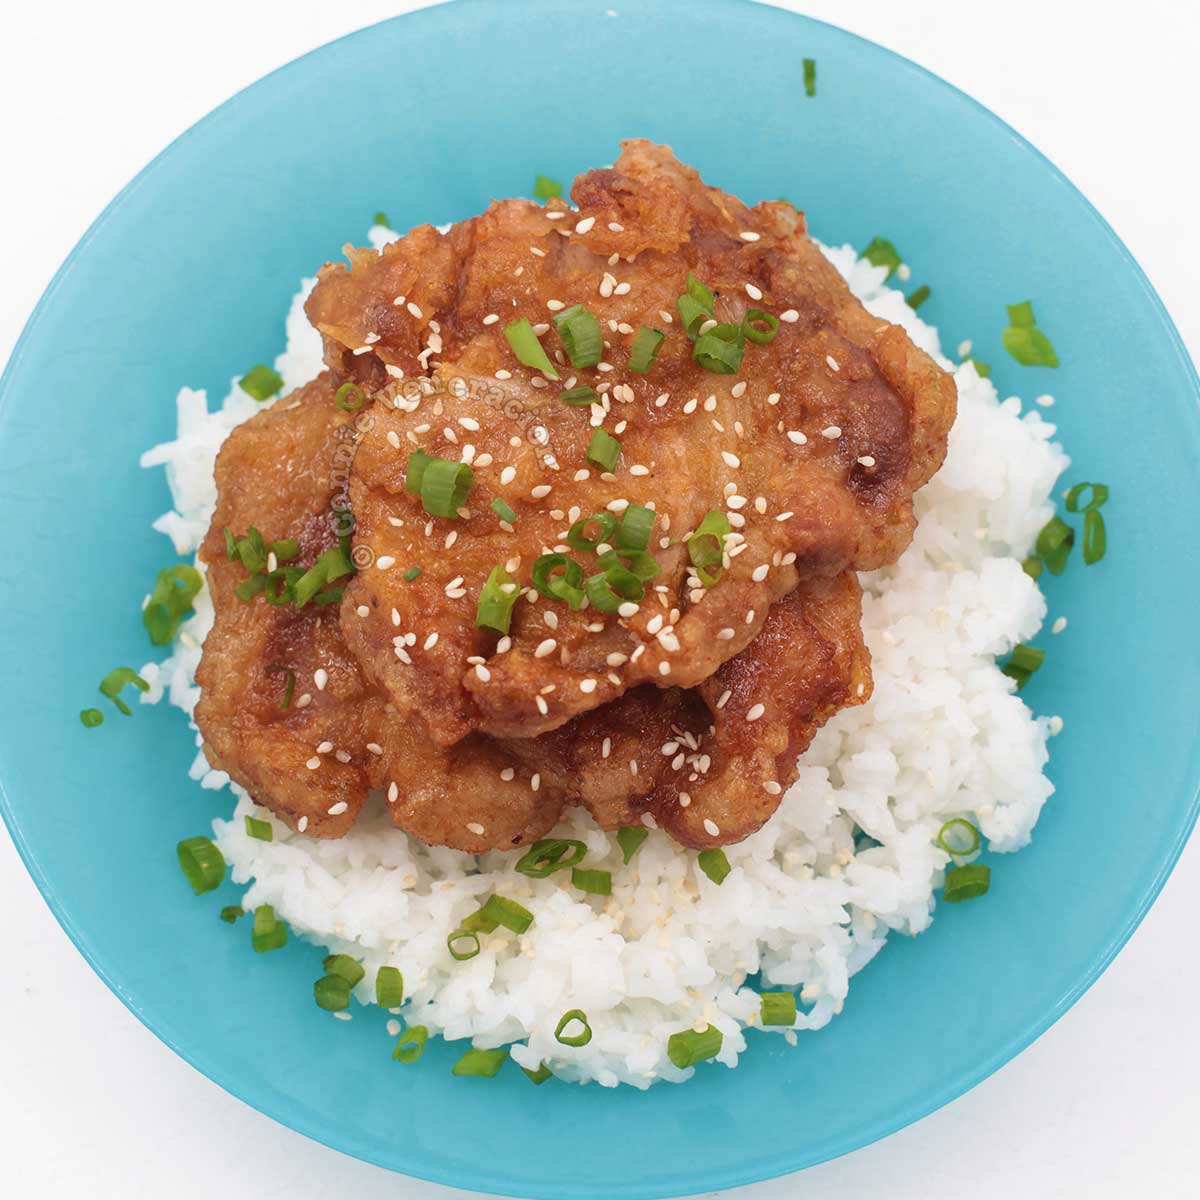 Sweet sour pork chops inspired by a dish featured in Season 2 of Somebody Feed Phil